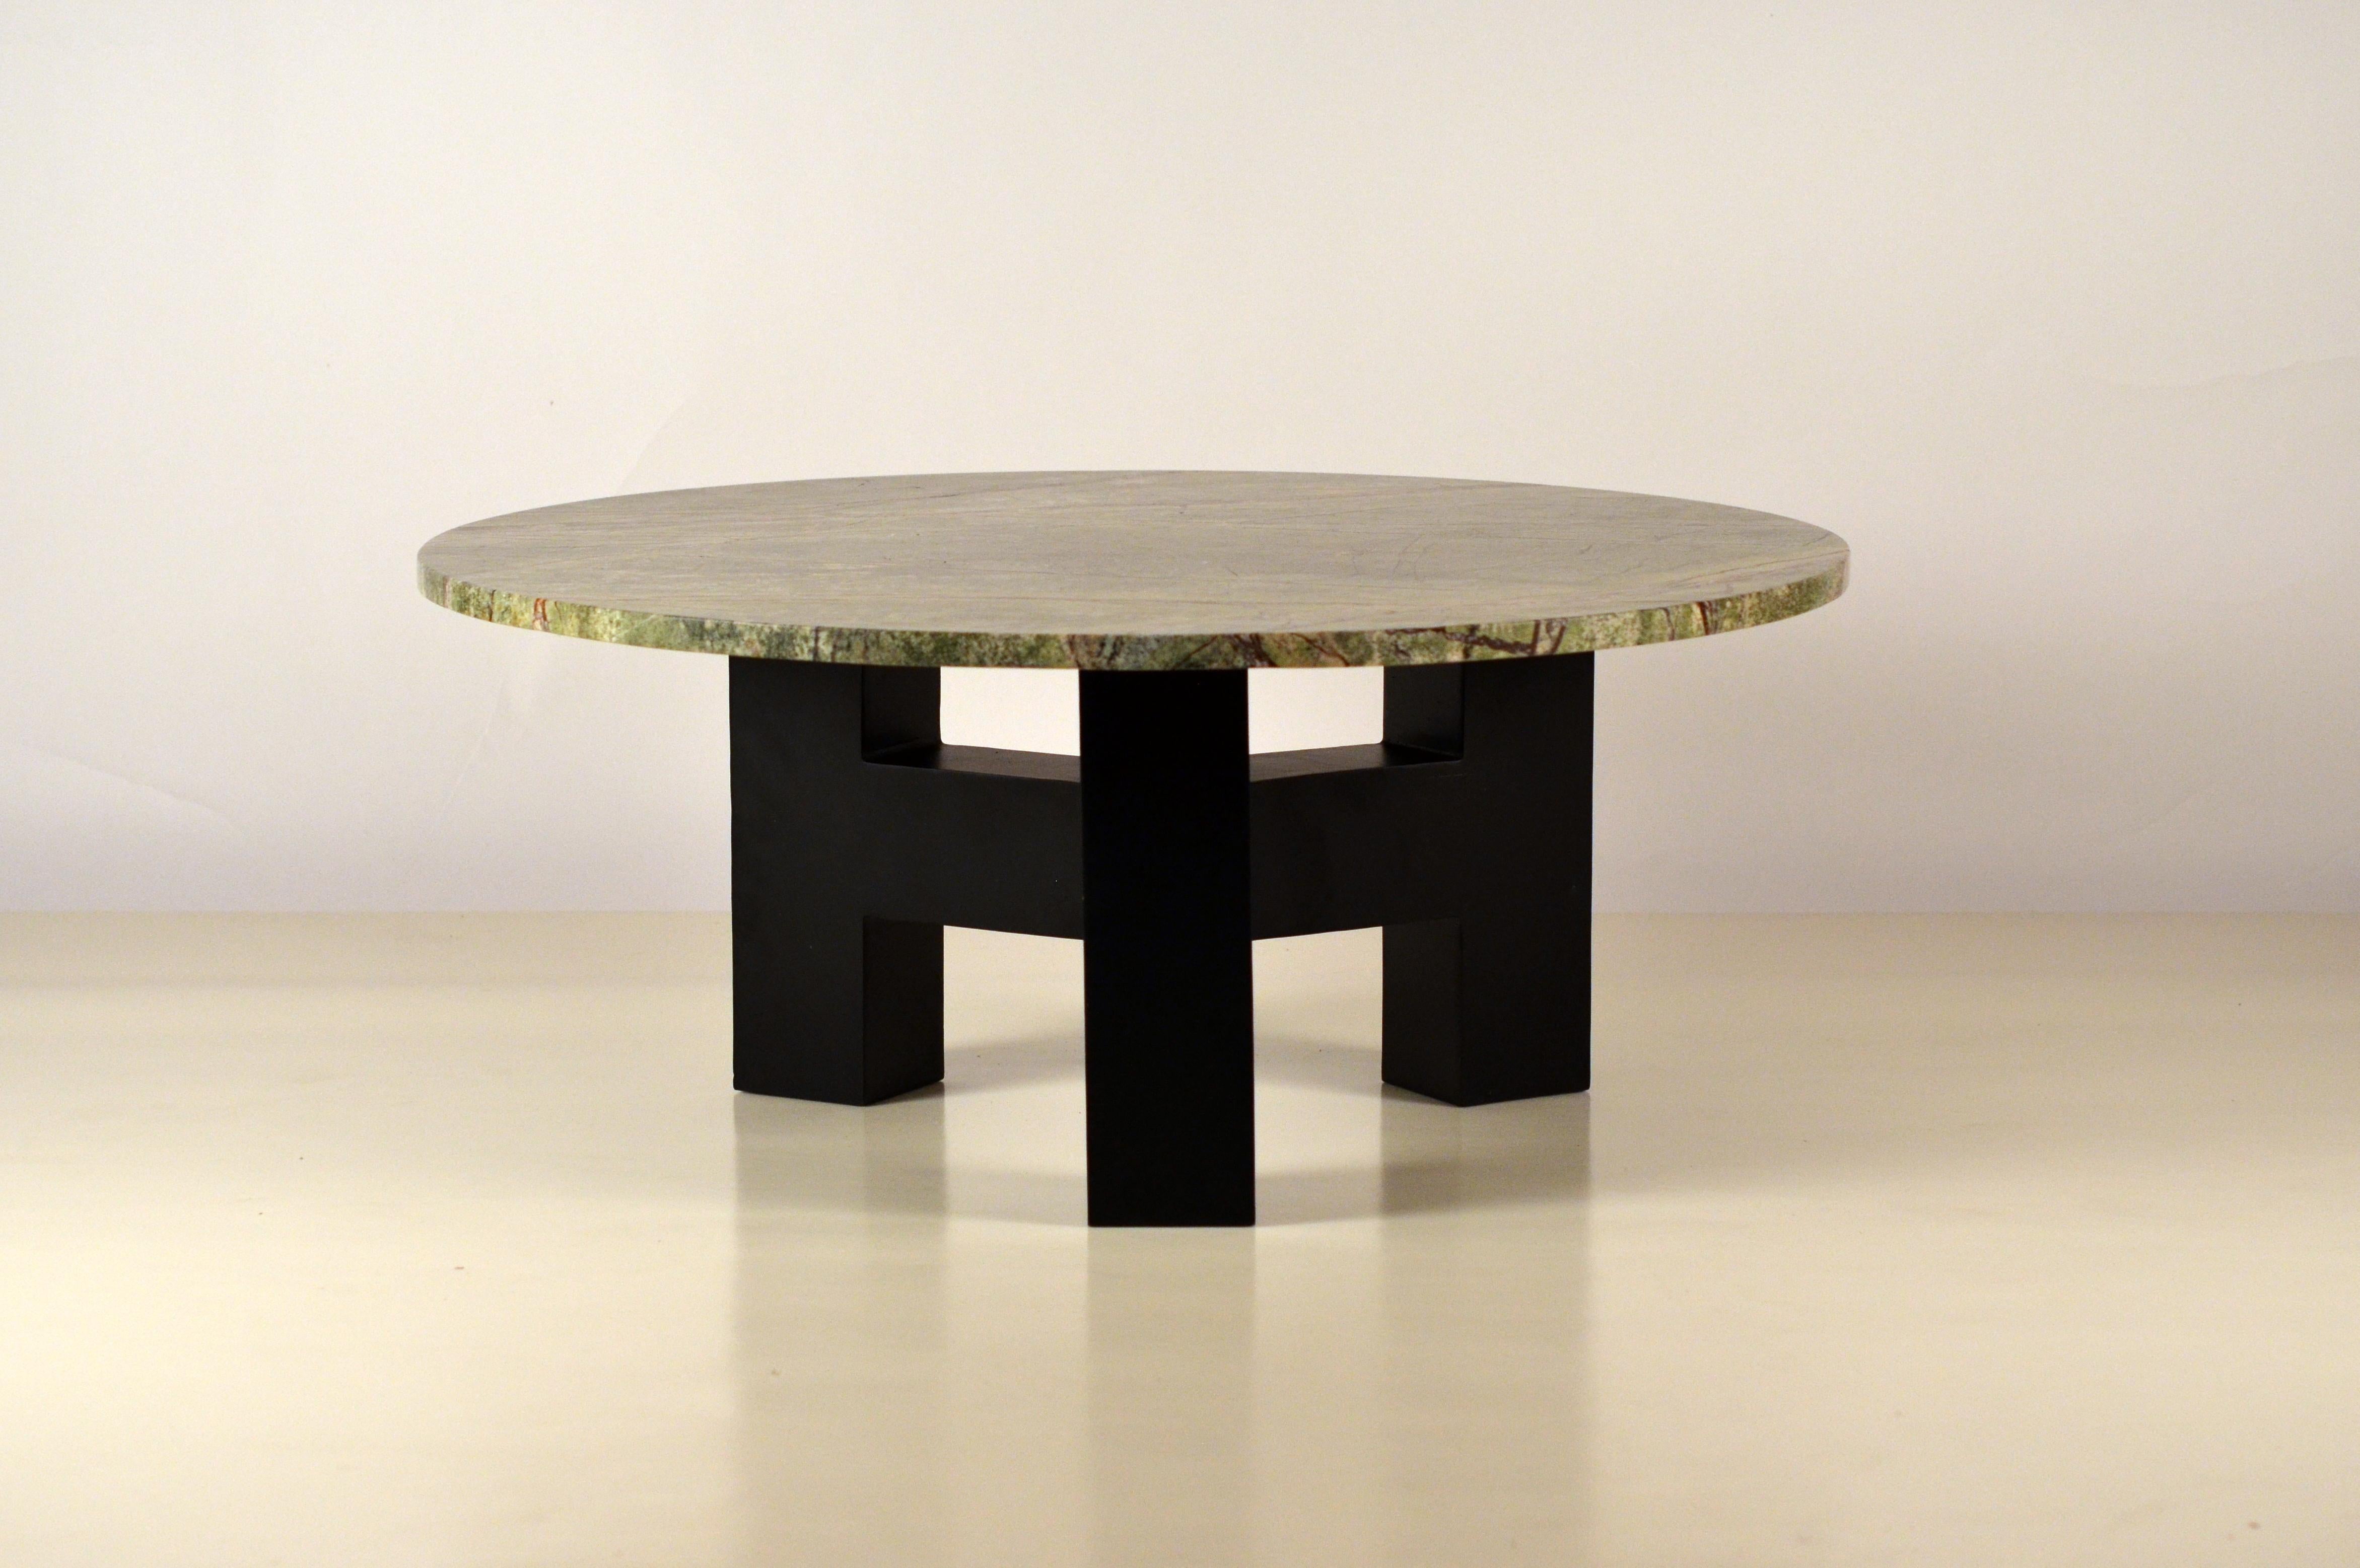 Round 'Upsilon' marble and blackened steel coffee table by Design Frères.

Polished round rain forest green veined marble over a heavy matte black tripod steel base.

Great focal point for any room.